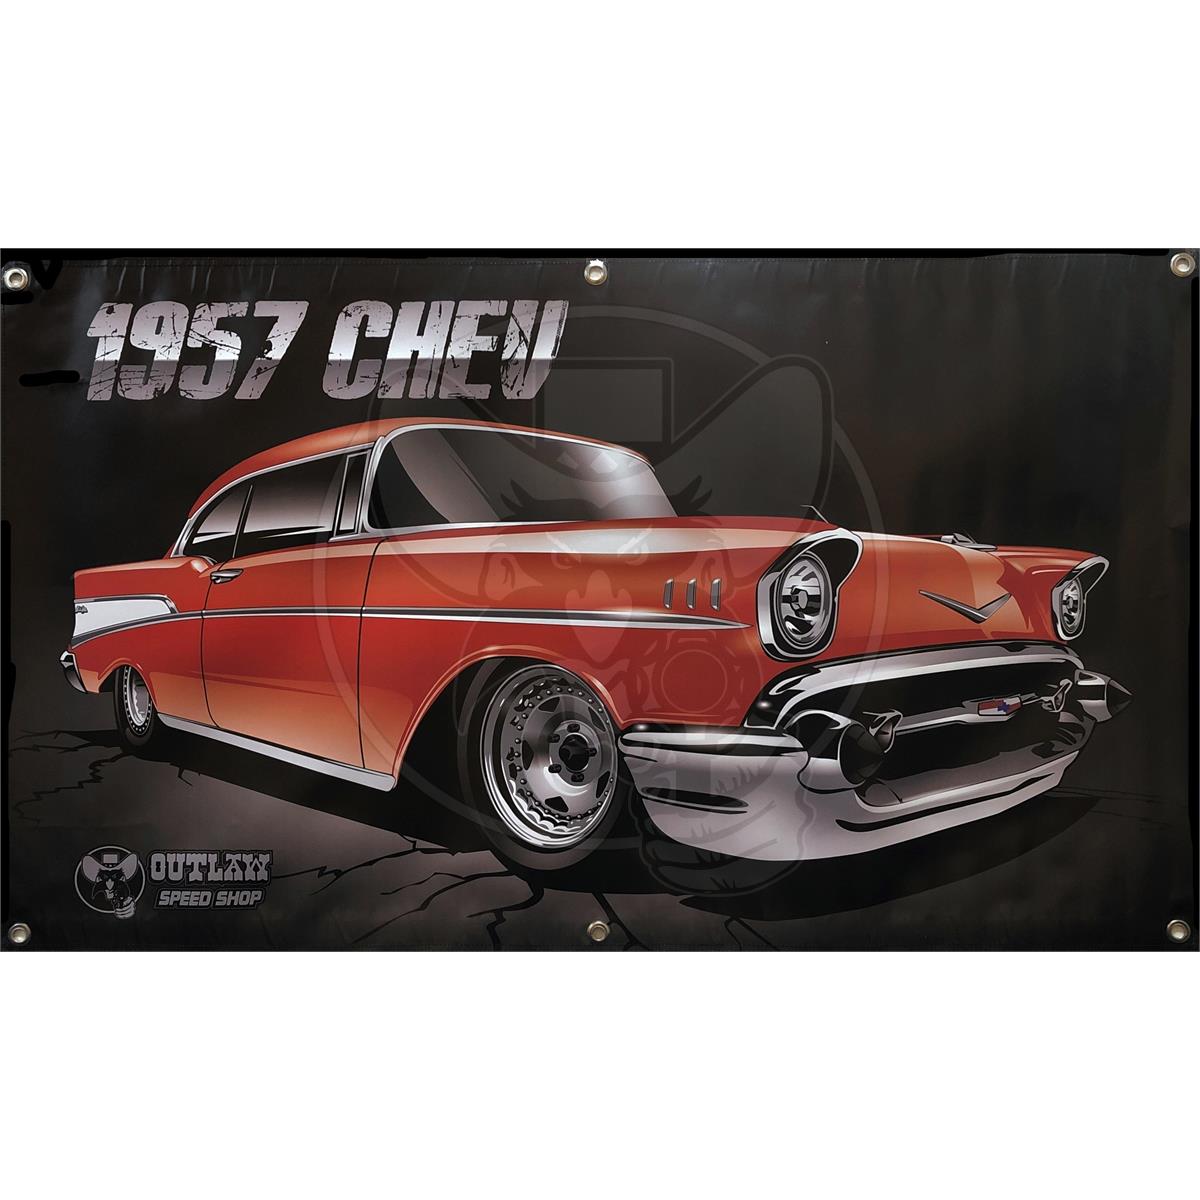 OUTLAW BANNER 1200MM X 700MM FITS CHEV 1957 RED COUPE